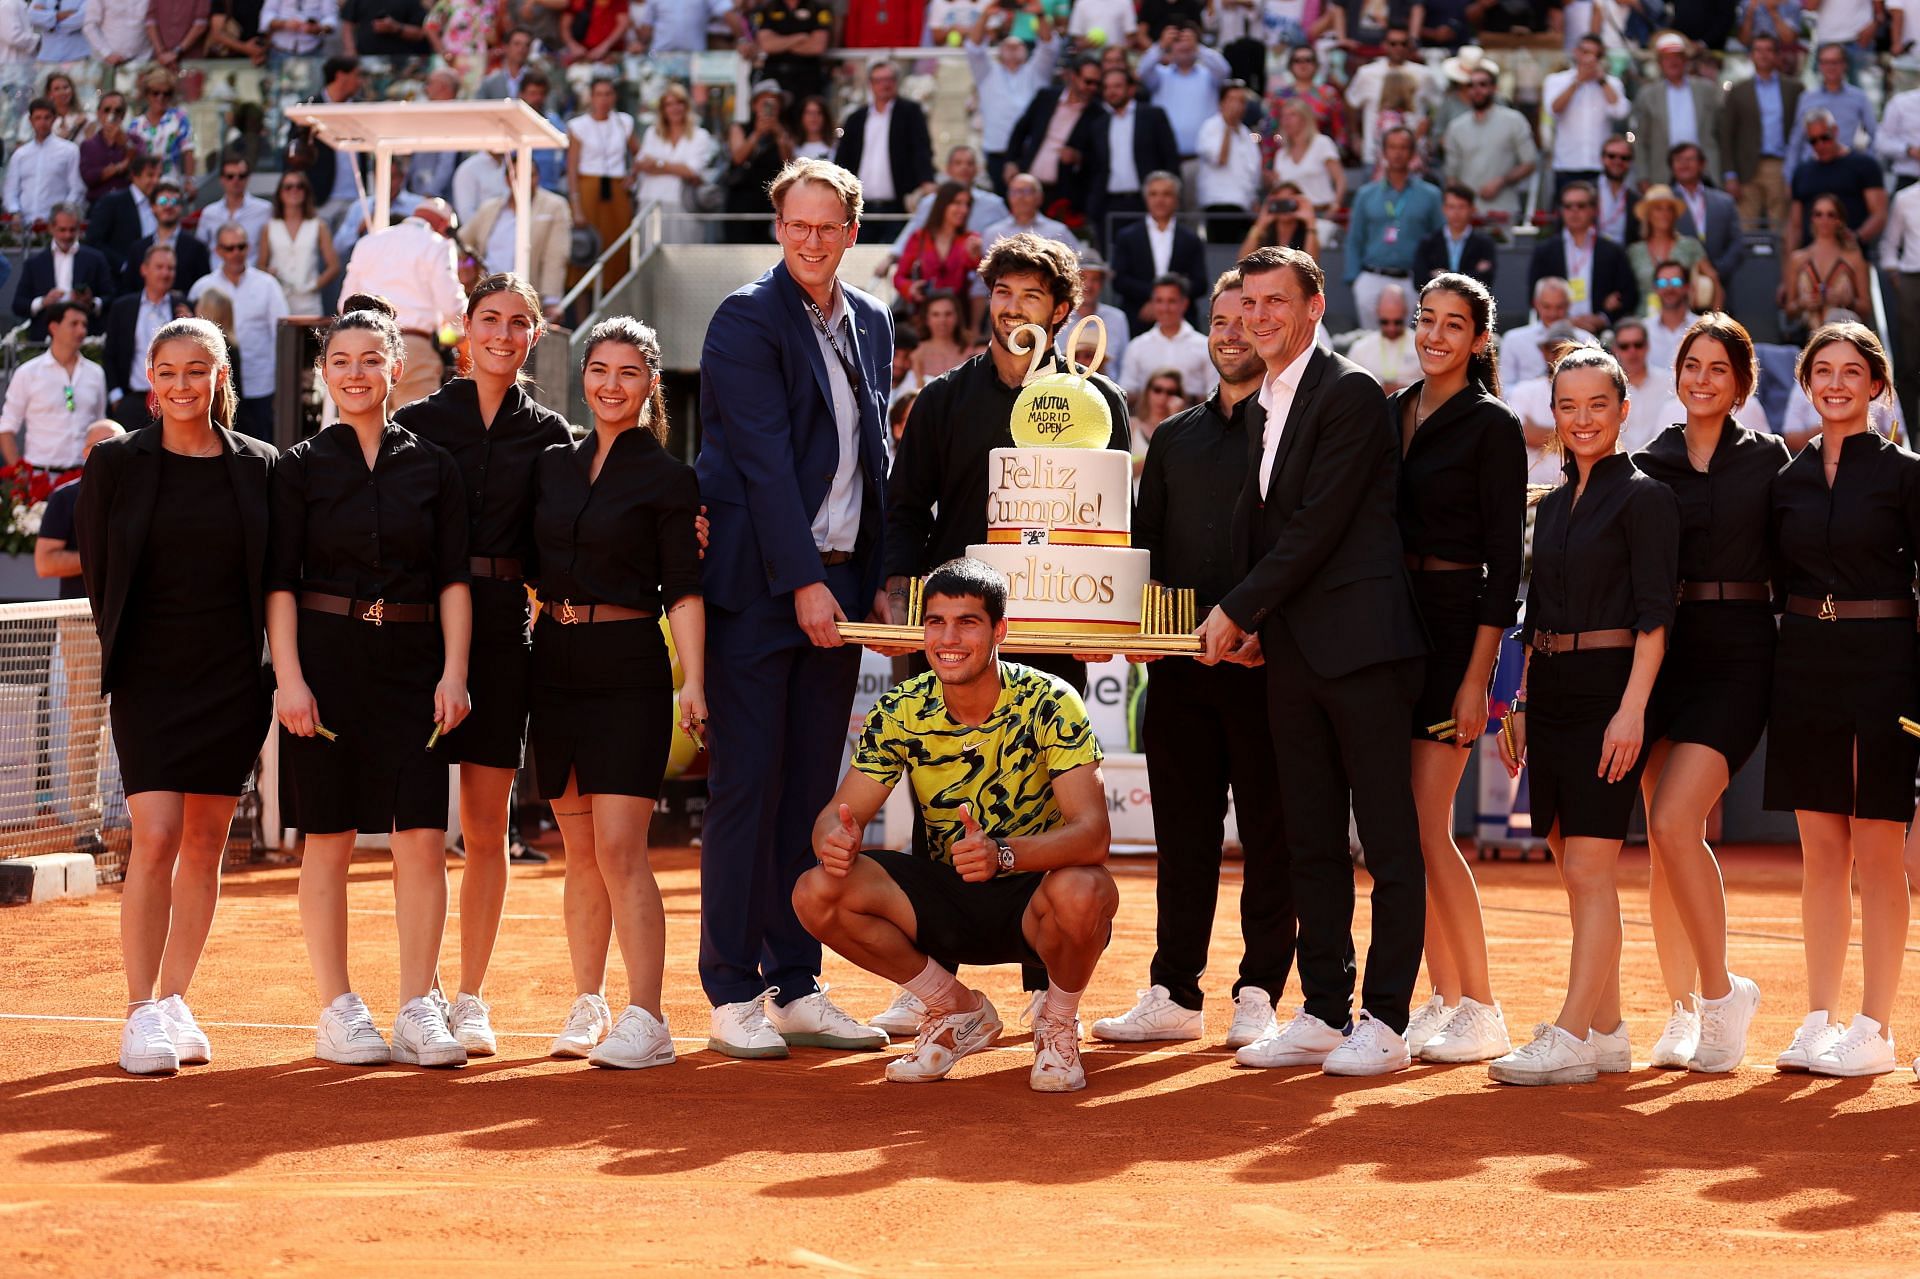 Carlos Alcaraz celebrates his birthday with a giant cake at the 2023 Madrid Open